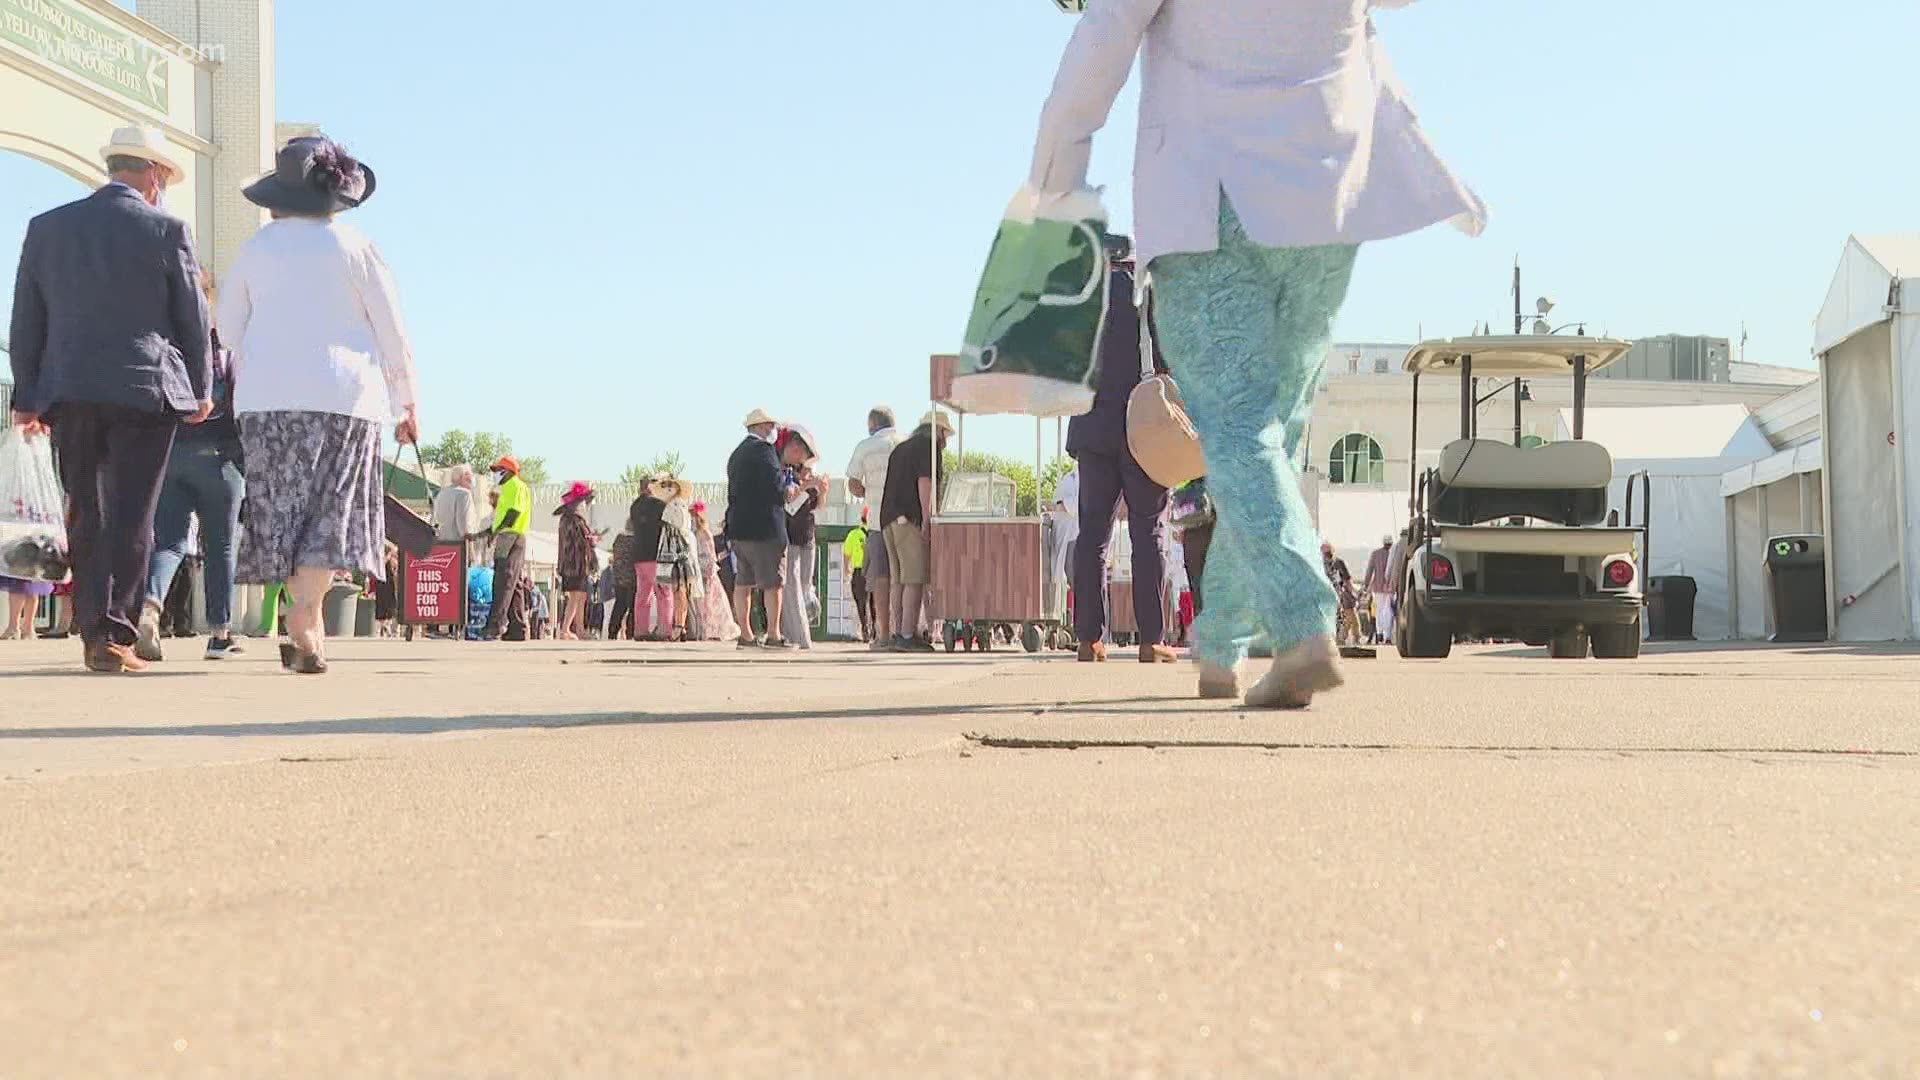 There's nothing like the spirit of Churchill Downs on Derby weekend. Even though capacity was cut in half, fans were excited to experience the Derby in person.